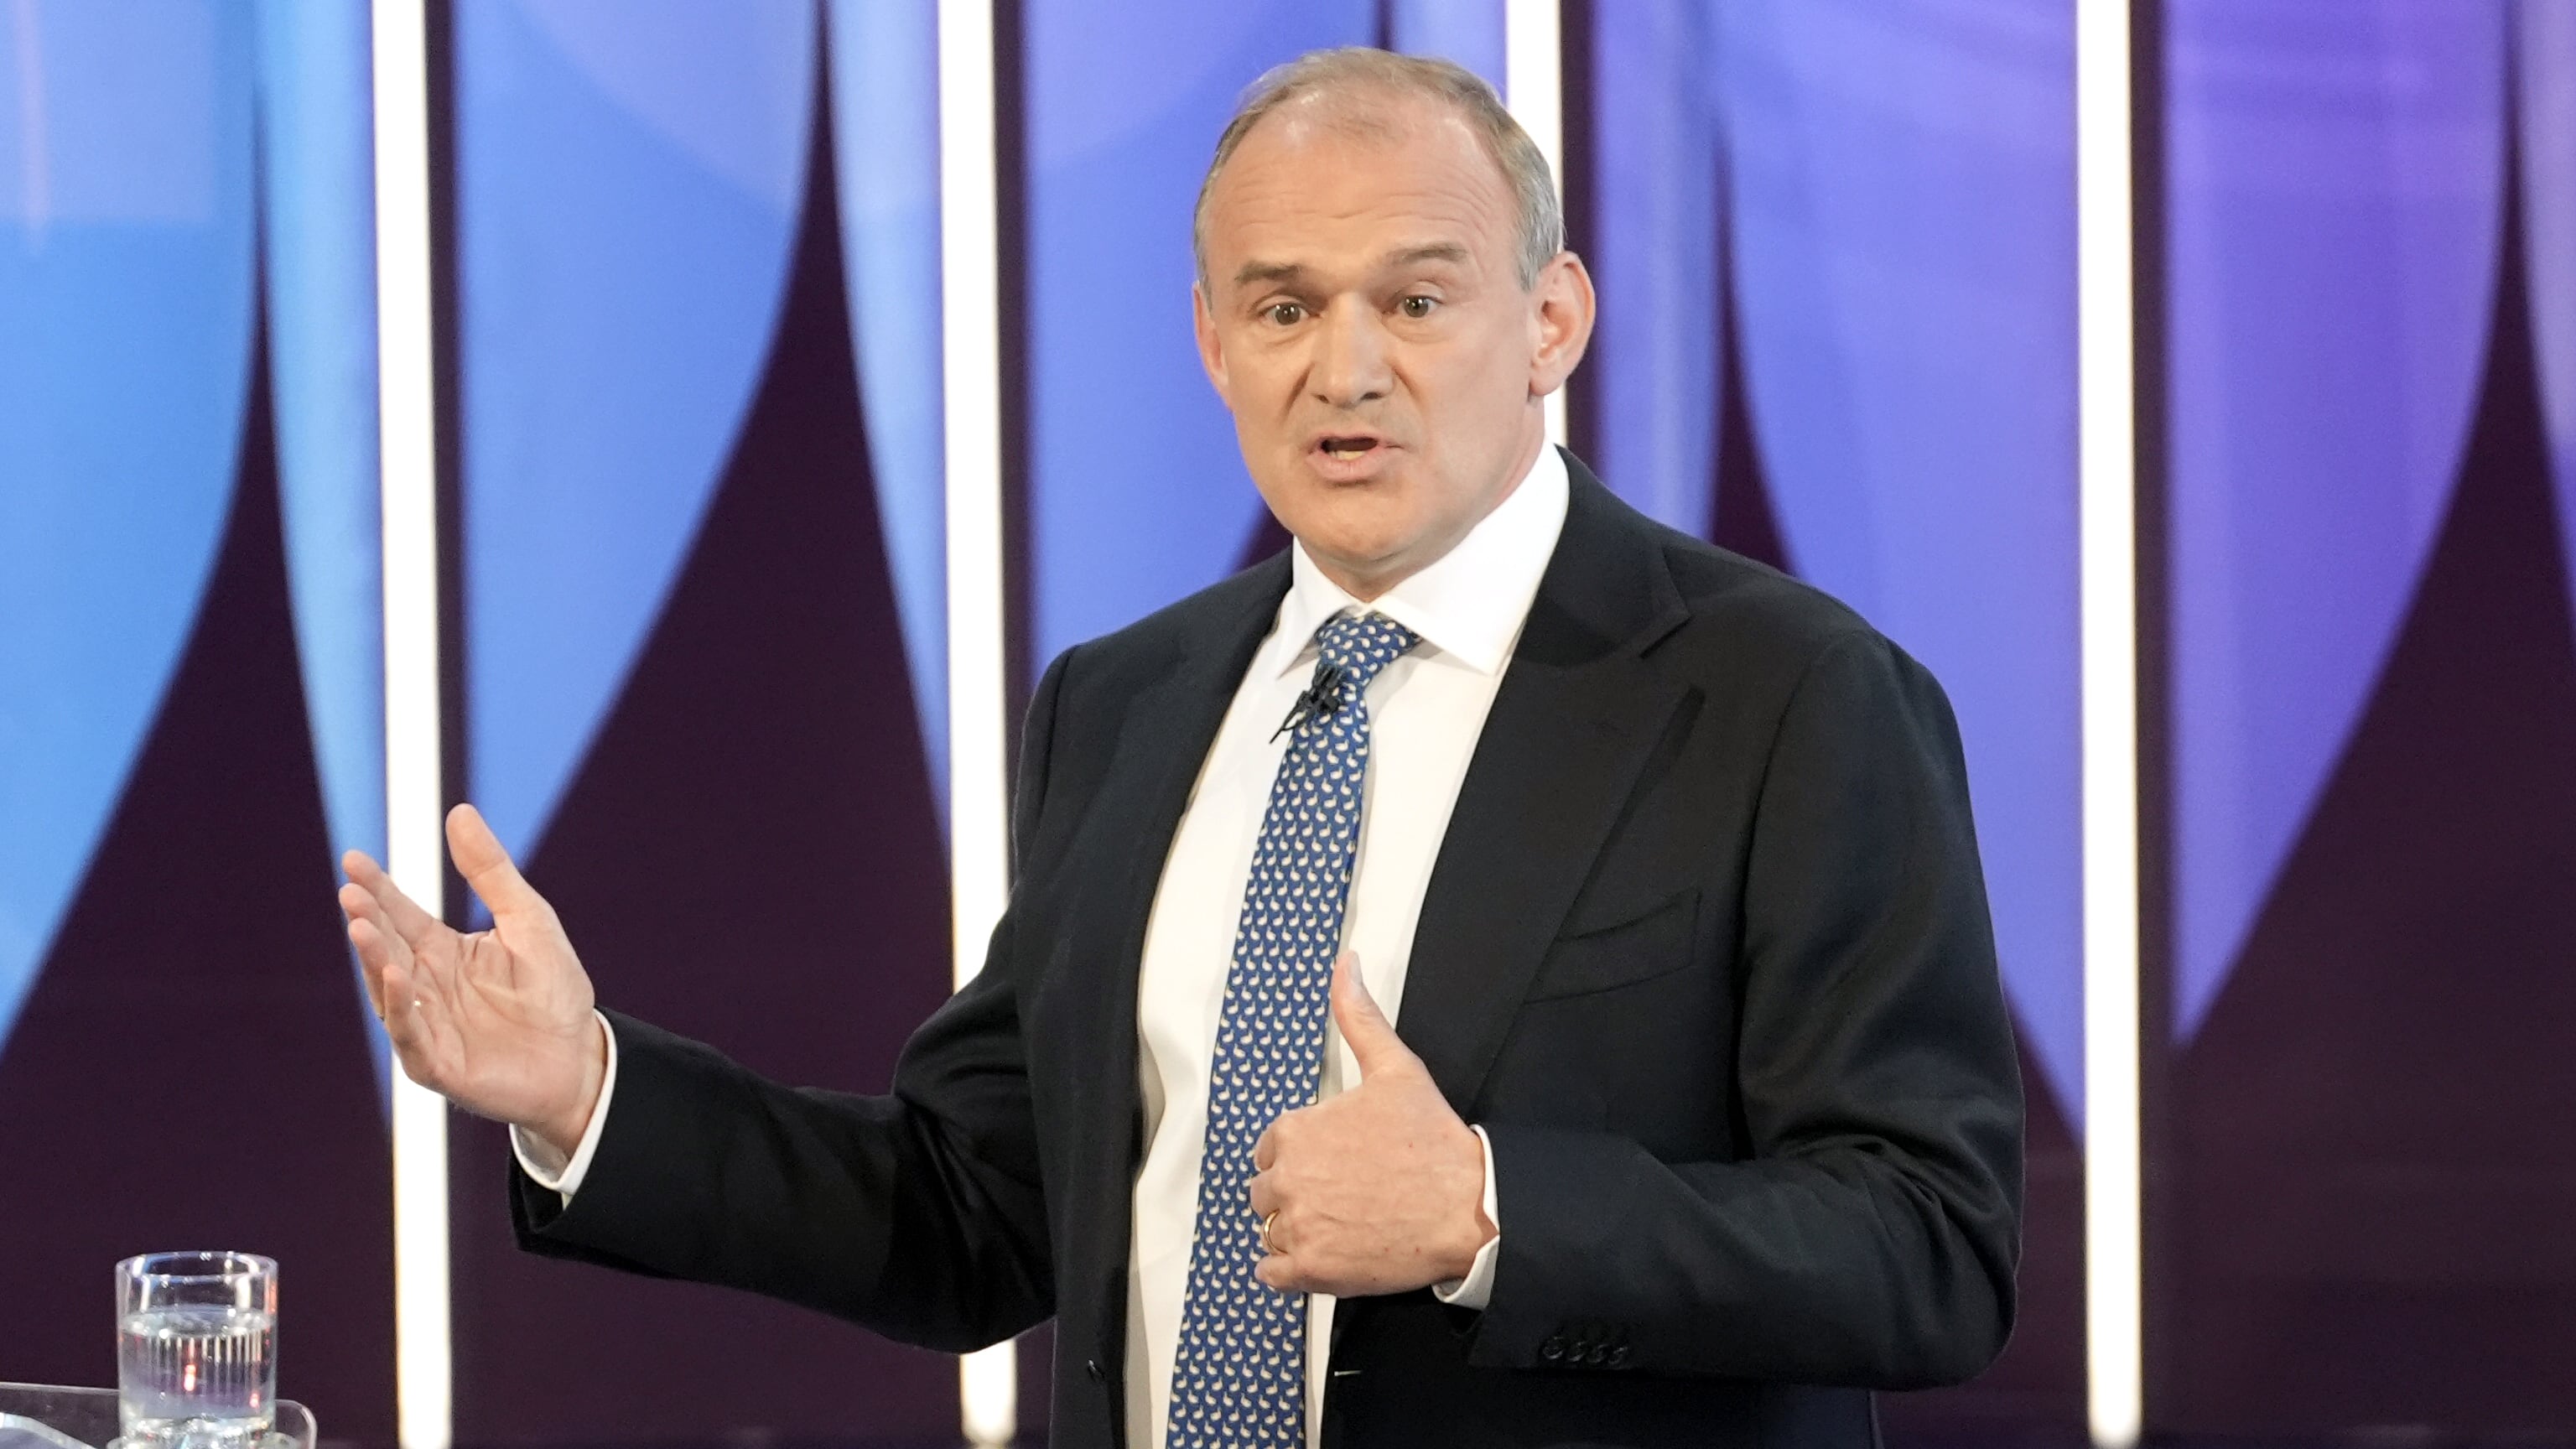 Liberal Democrats leader Sir Ed Davey on Question Time